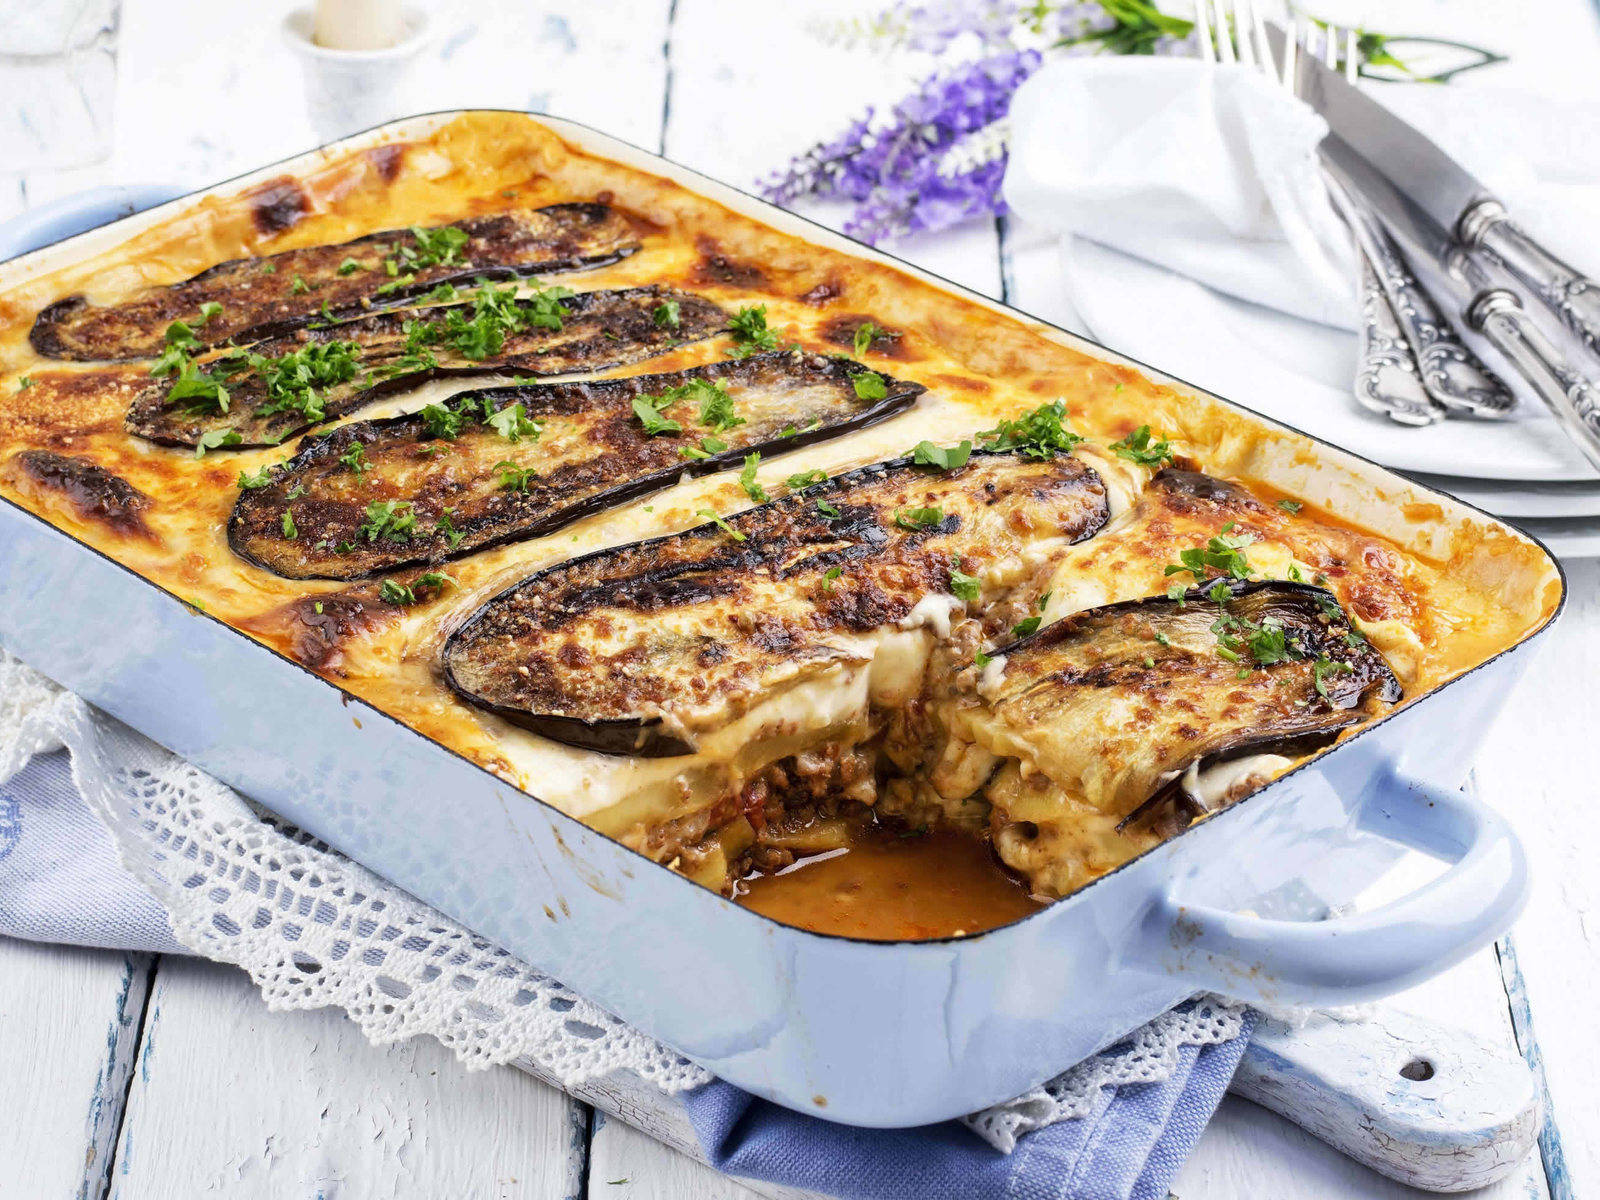 Slices Of Eggplant Topped On Moussaka Wallpaper